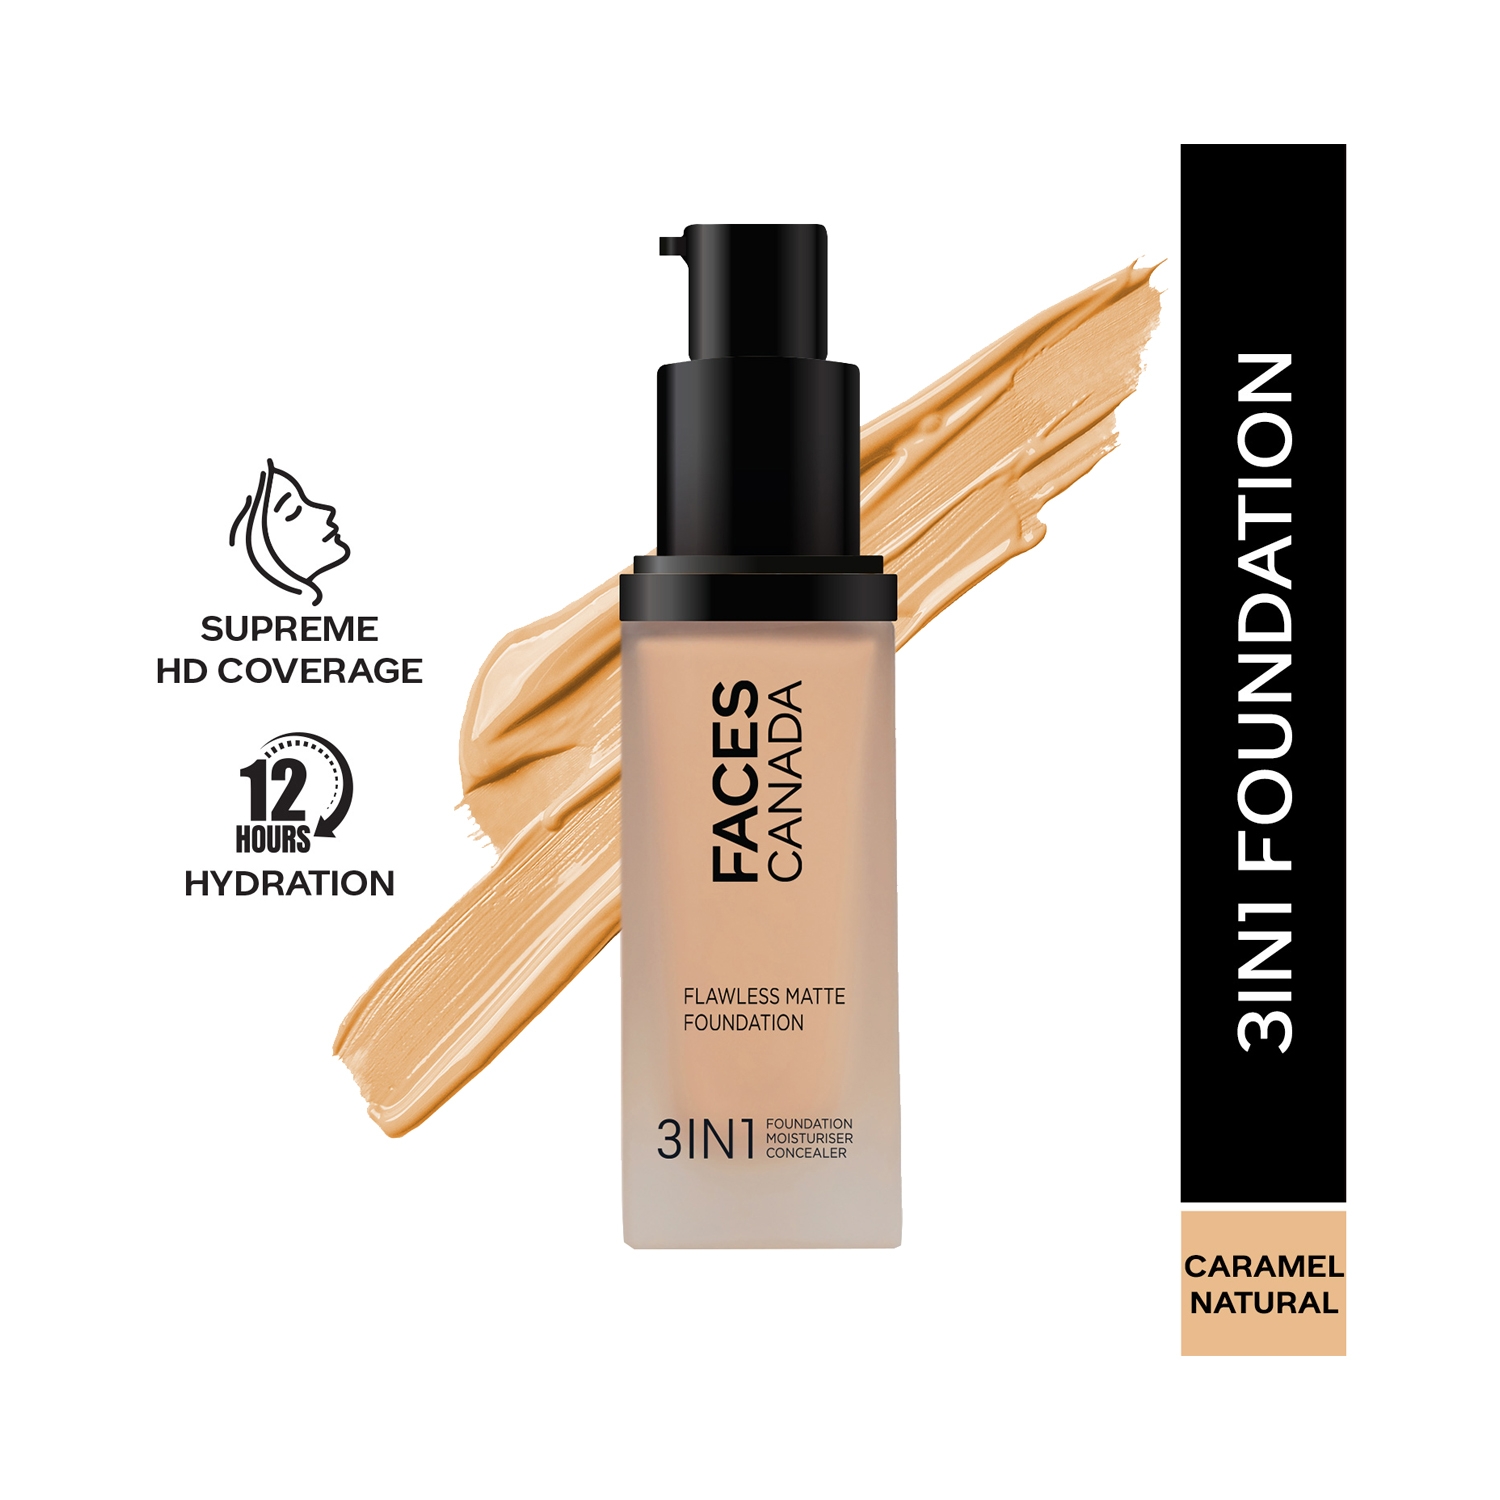 Faces Canada | Faces Canada 3-In-1 Flawless Matte Foundation SPF 18 - 023 Caramel Natural (30ml)